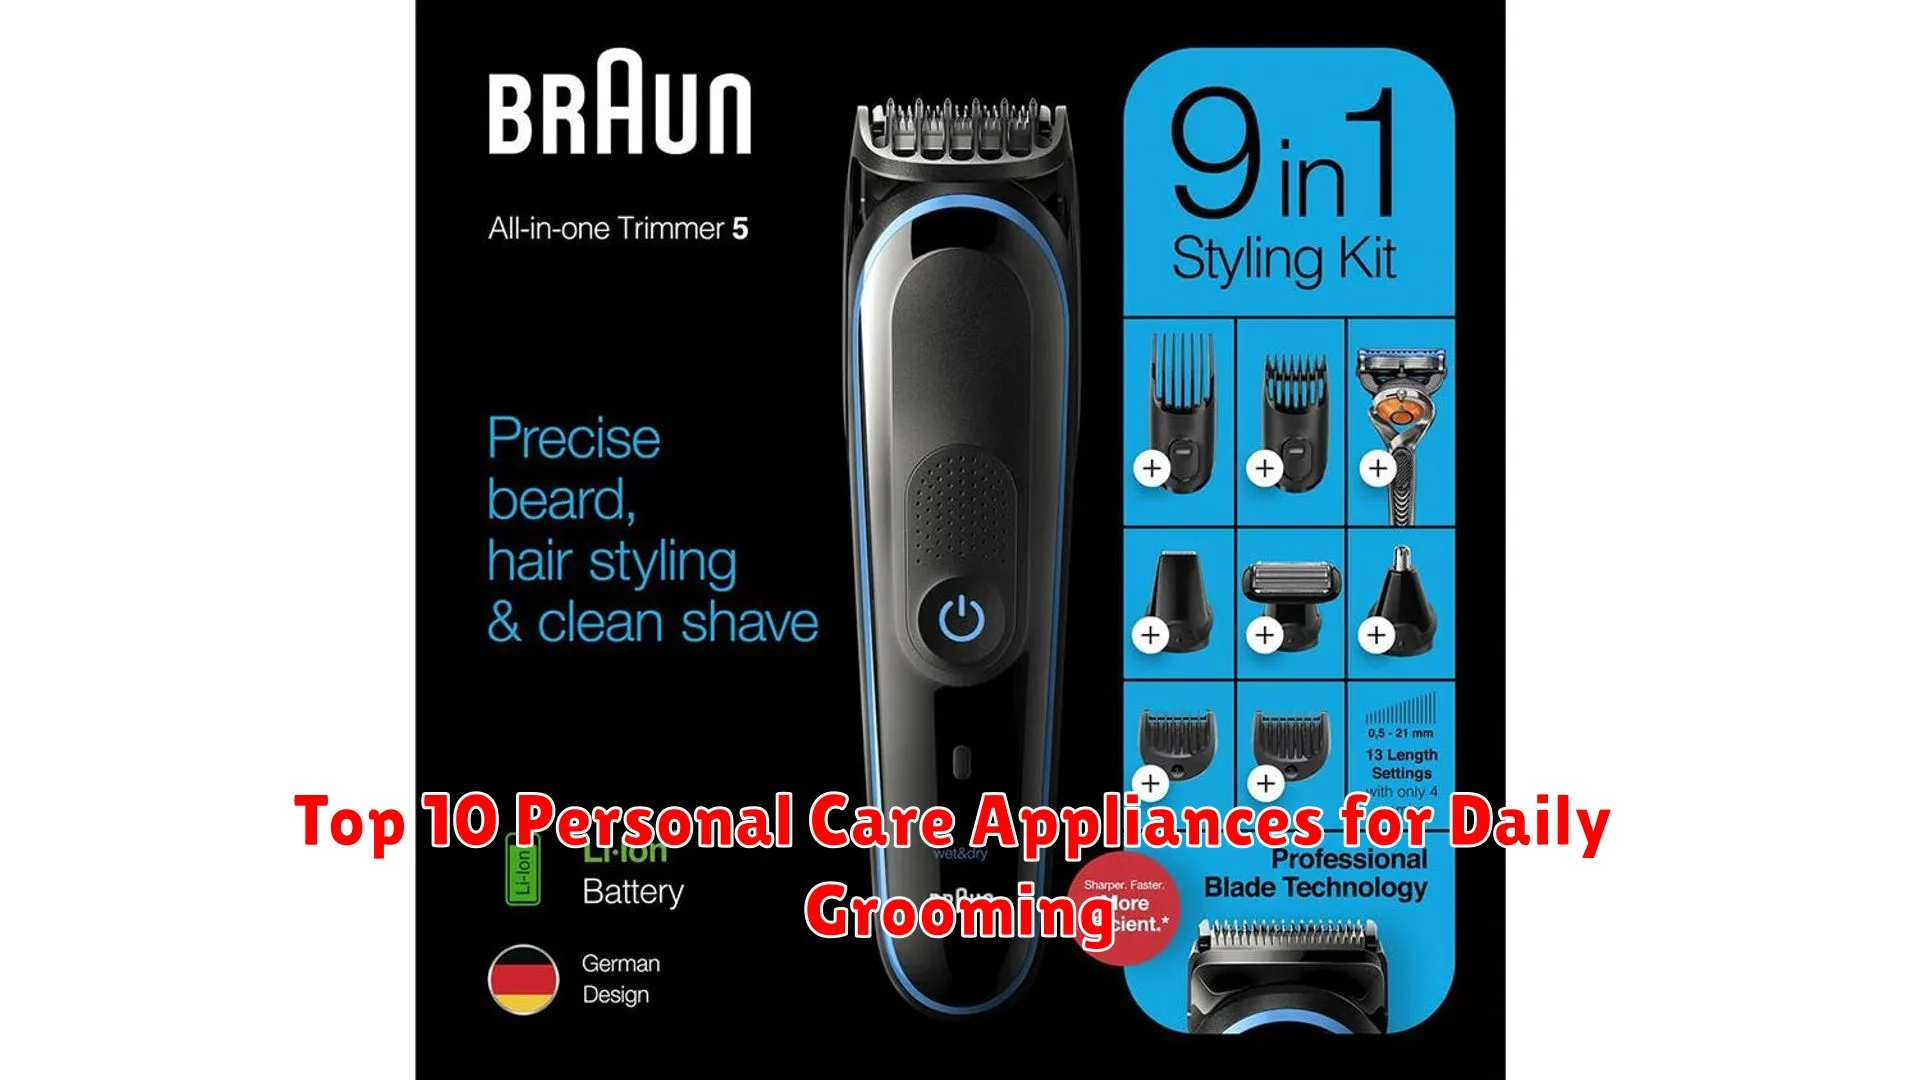 Top 10 Personal Care Appliances for Daily Grooming